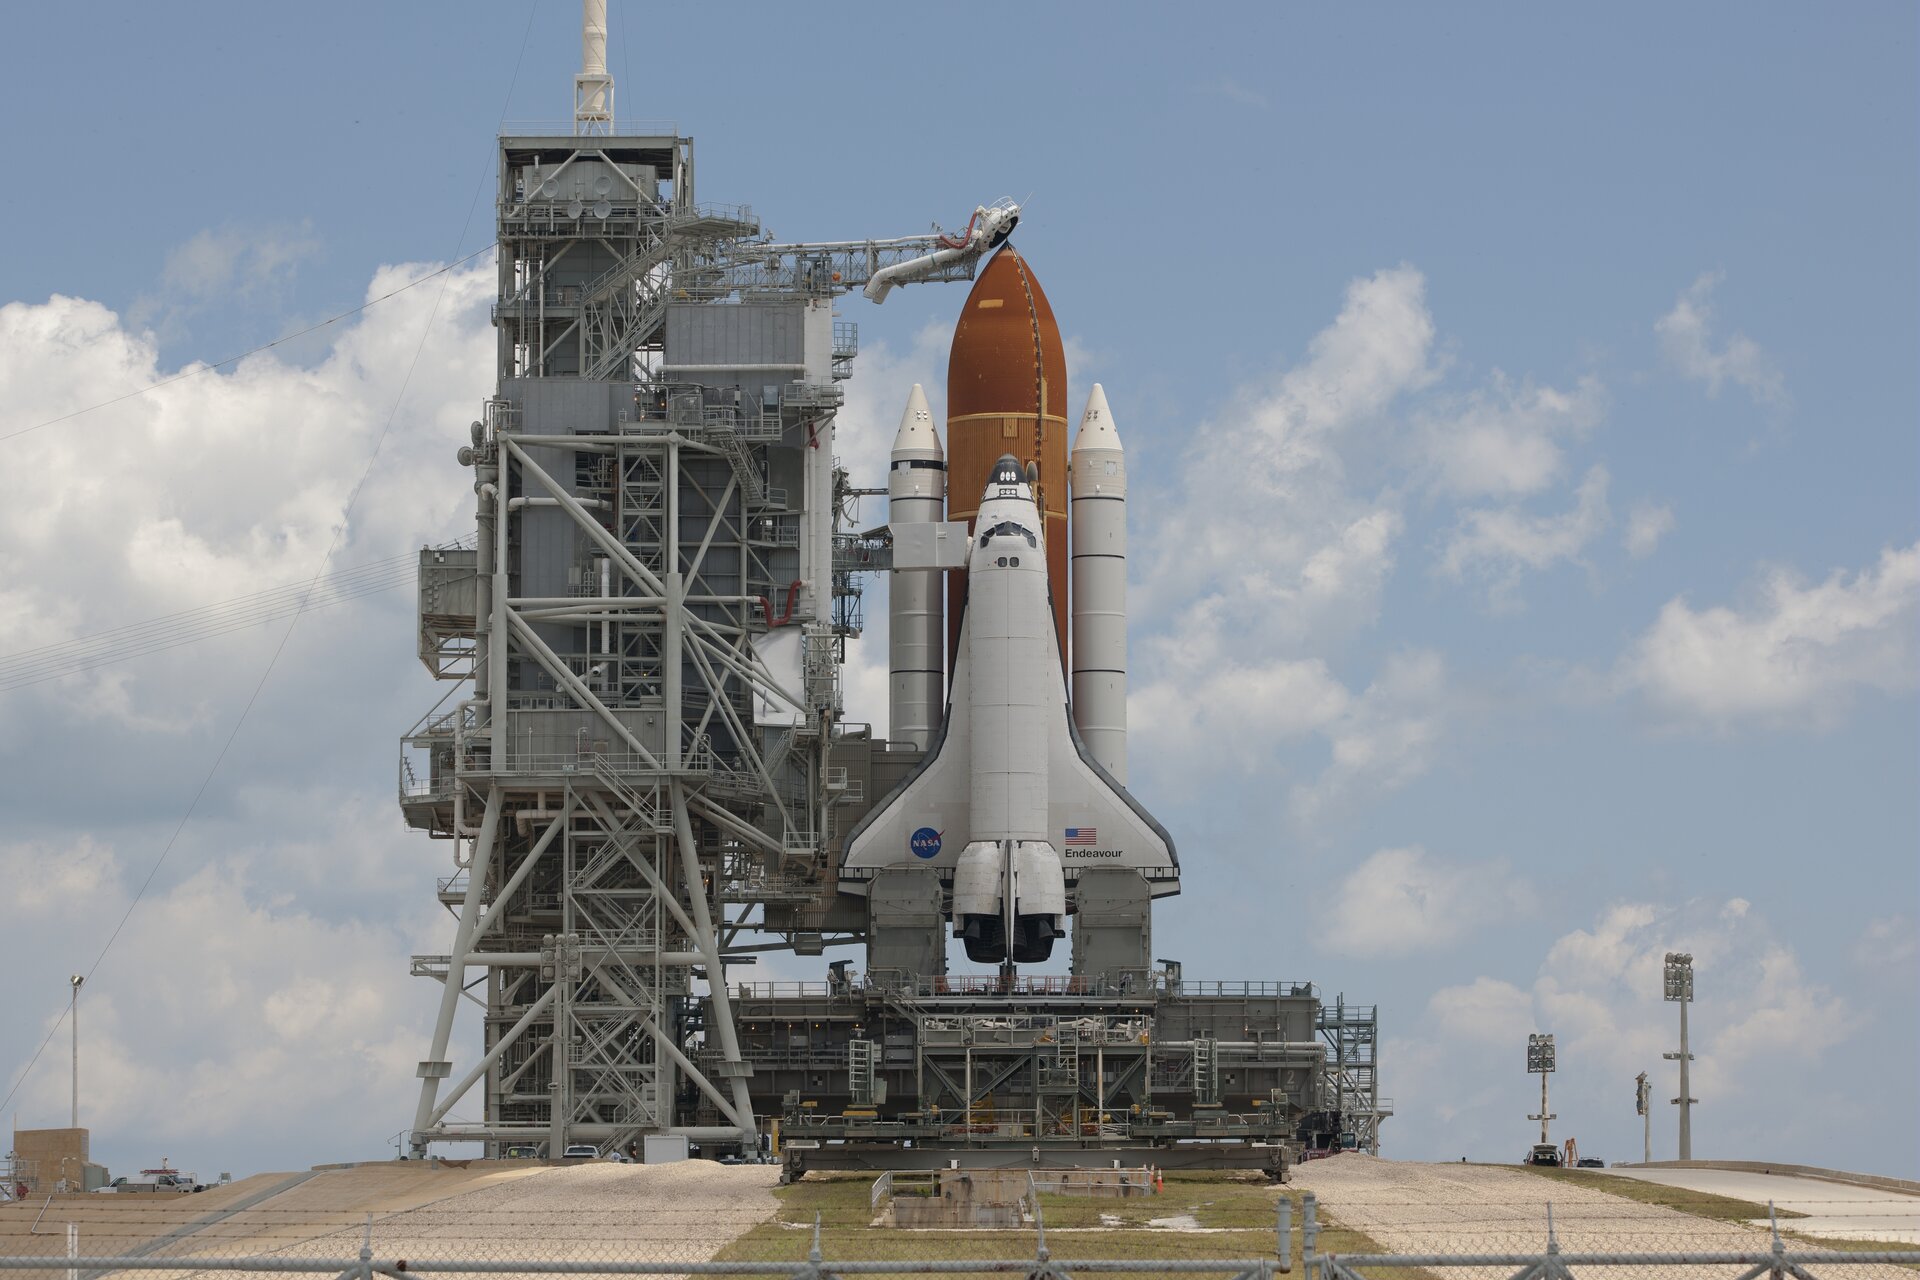 Endeavour on Launch Pad 39A